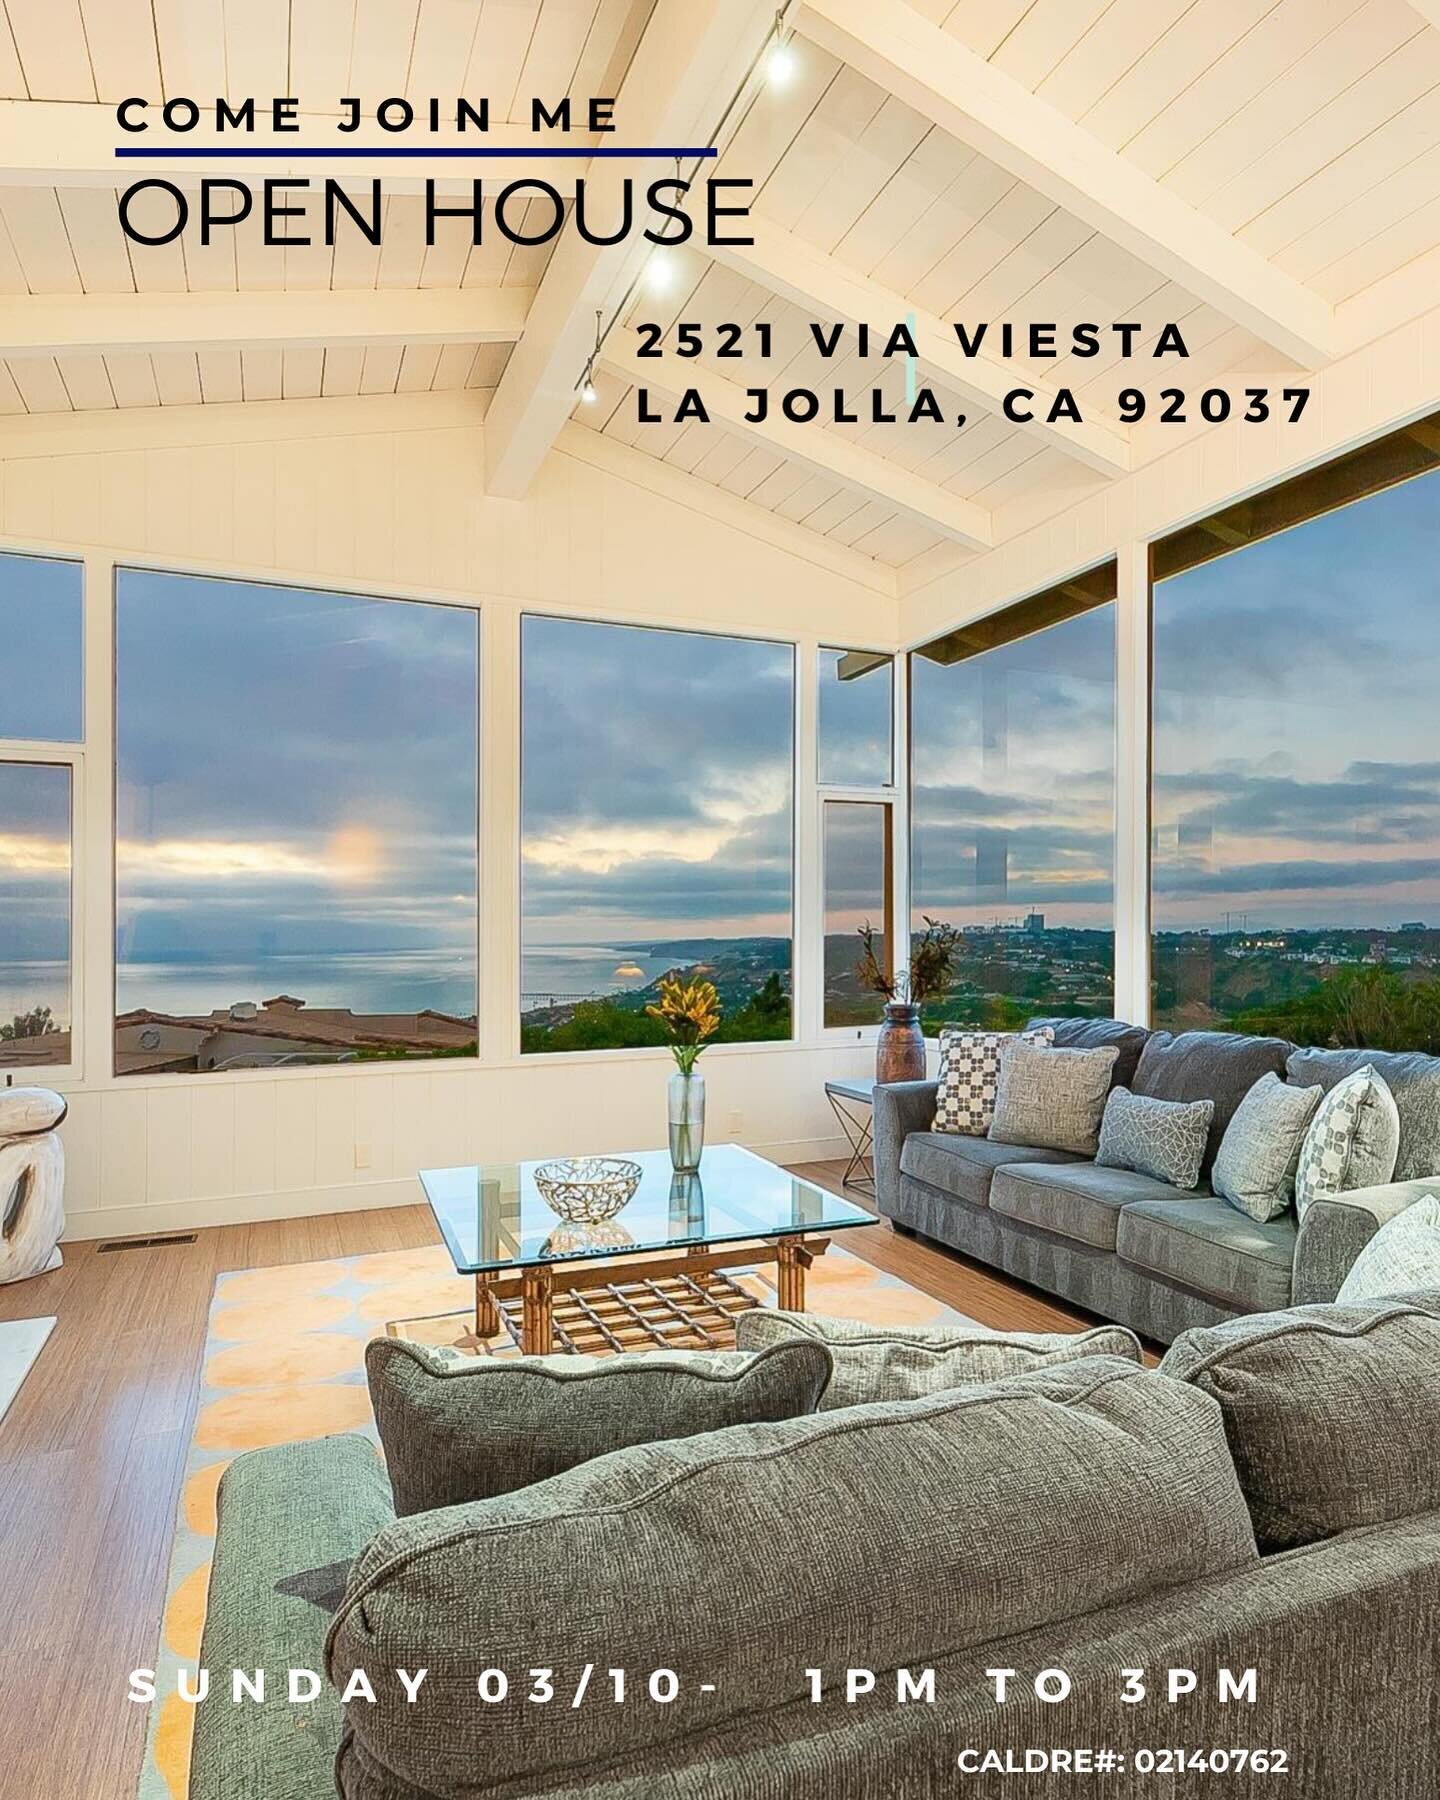 One of the best expansive north facing views that I have seen in a La Jolla property. Located on a private street in Hidden Valley hills, this impressive 4 bedroom, 4 bath, 3,284 sq. ft. residence has a pool and many of the features for those seeking